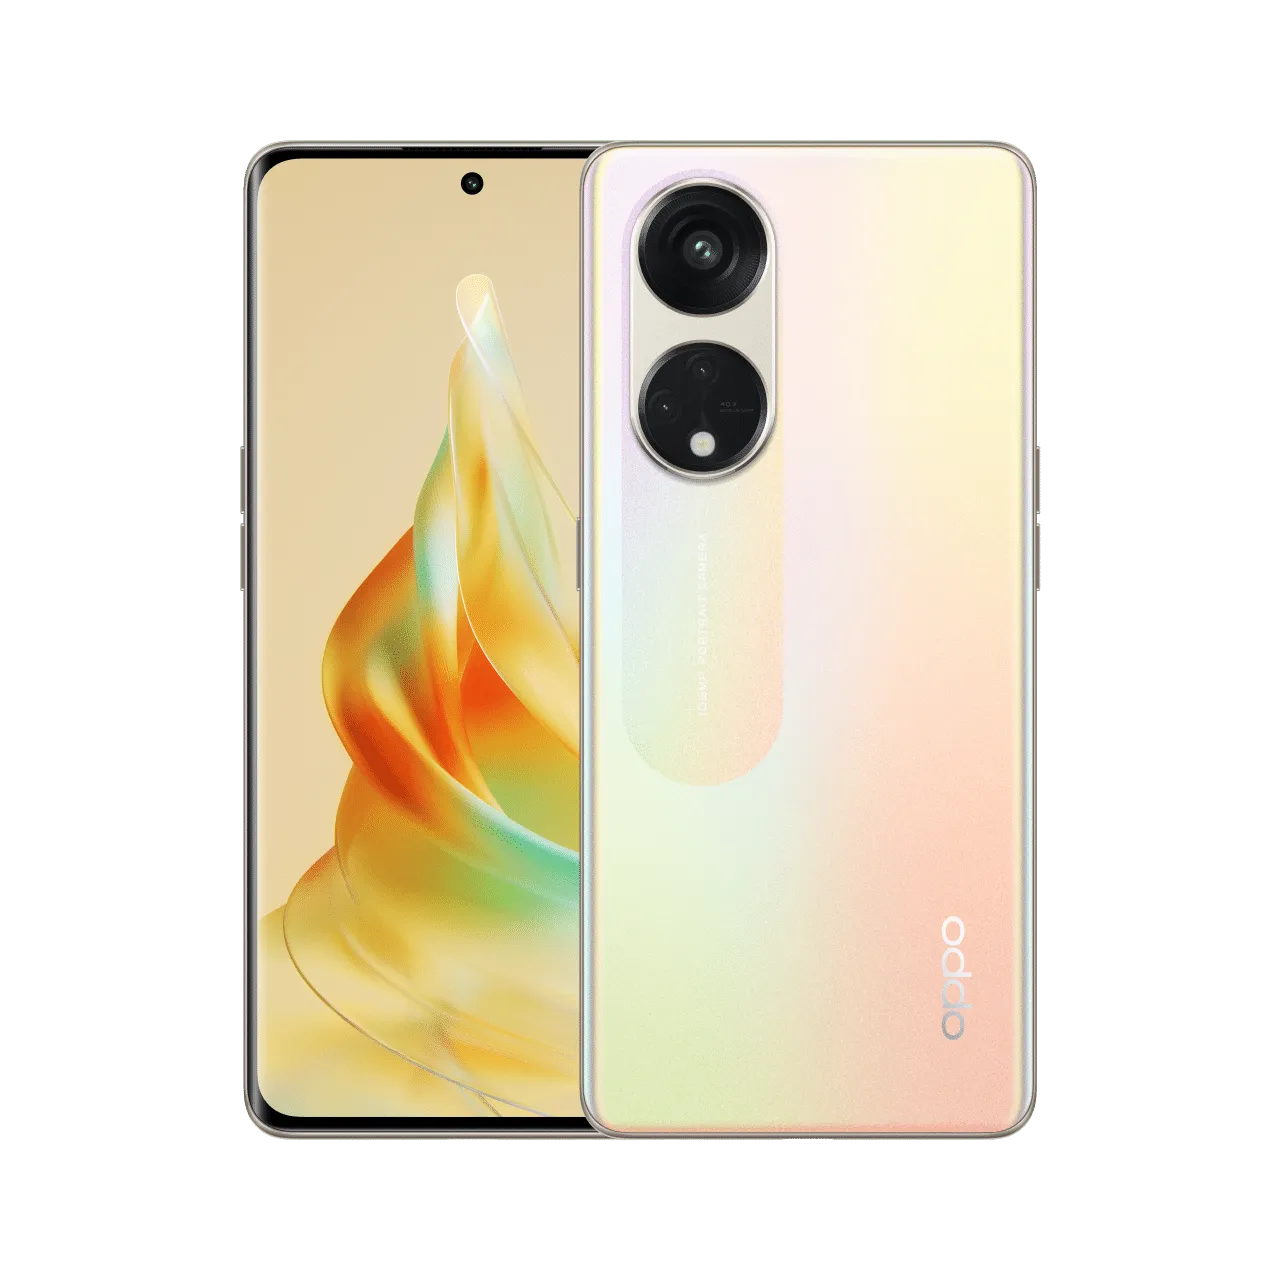 OPPO Reno 5G - Further Your Vision